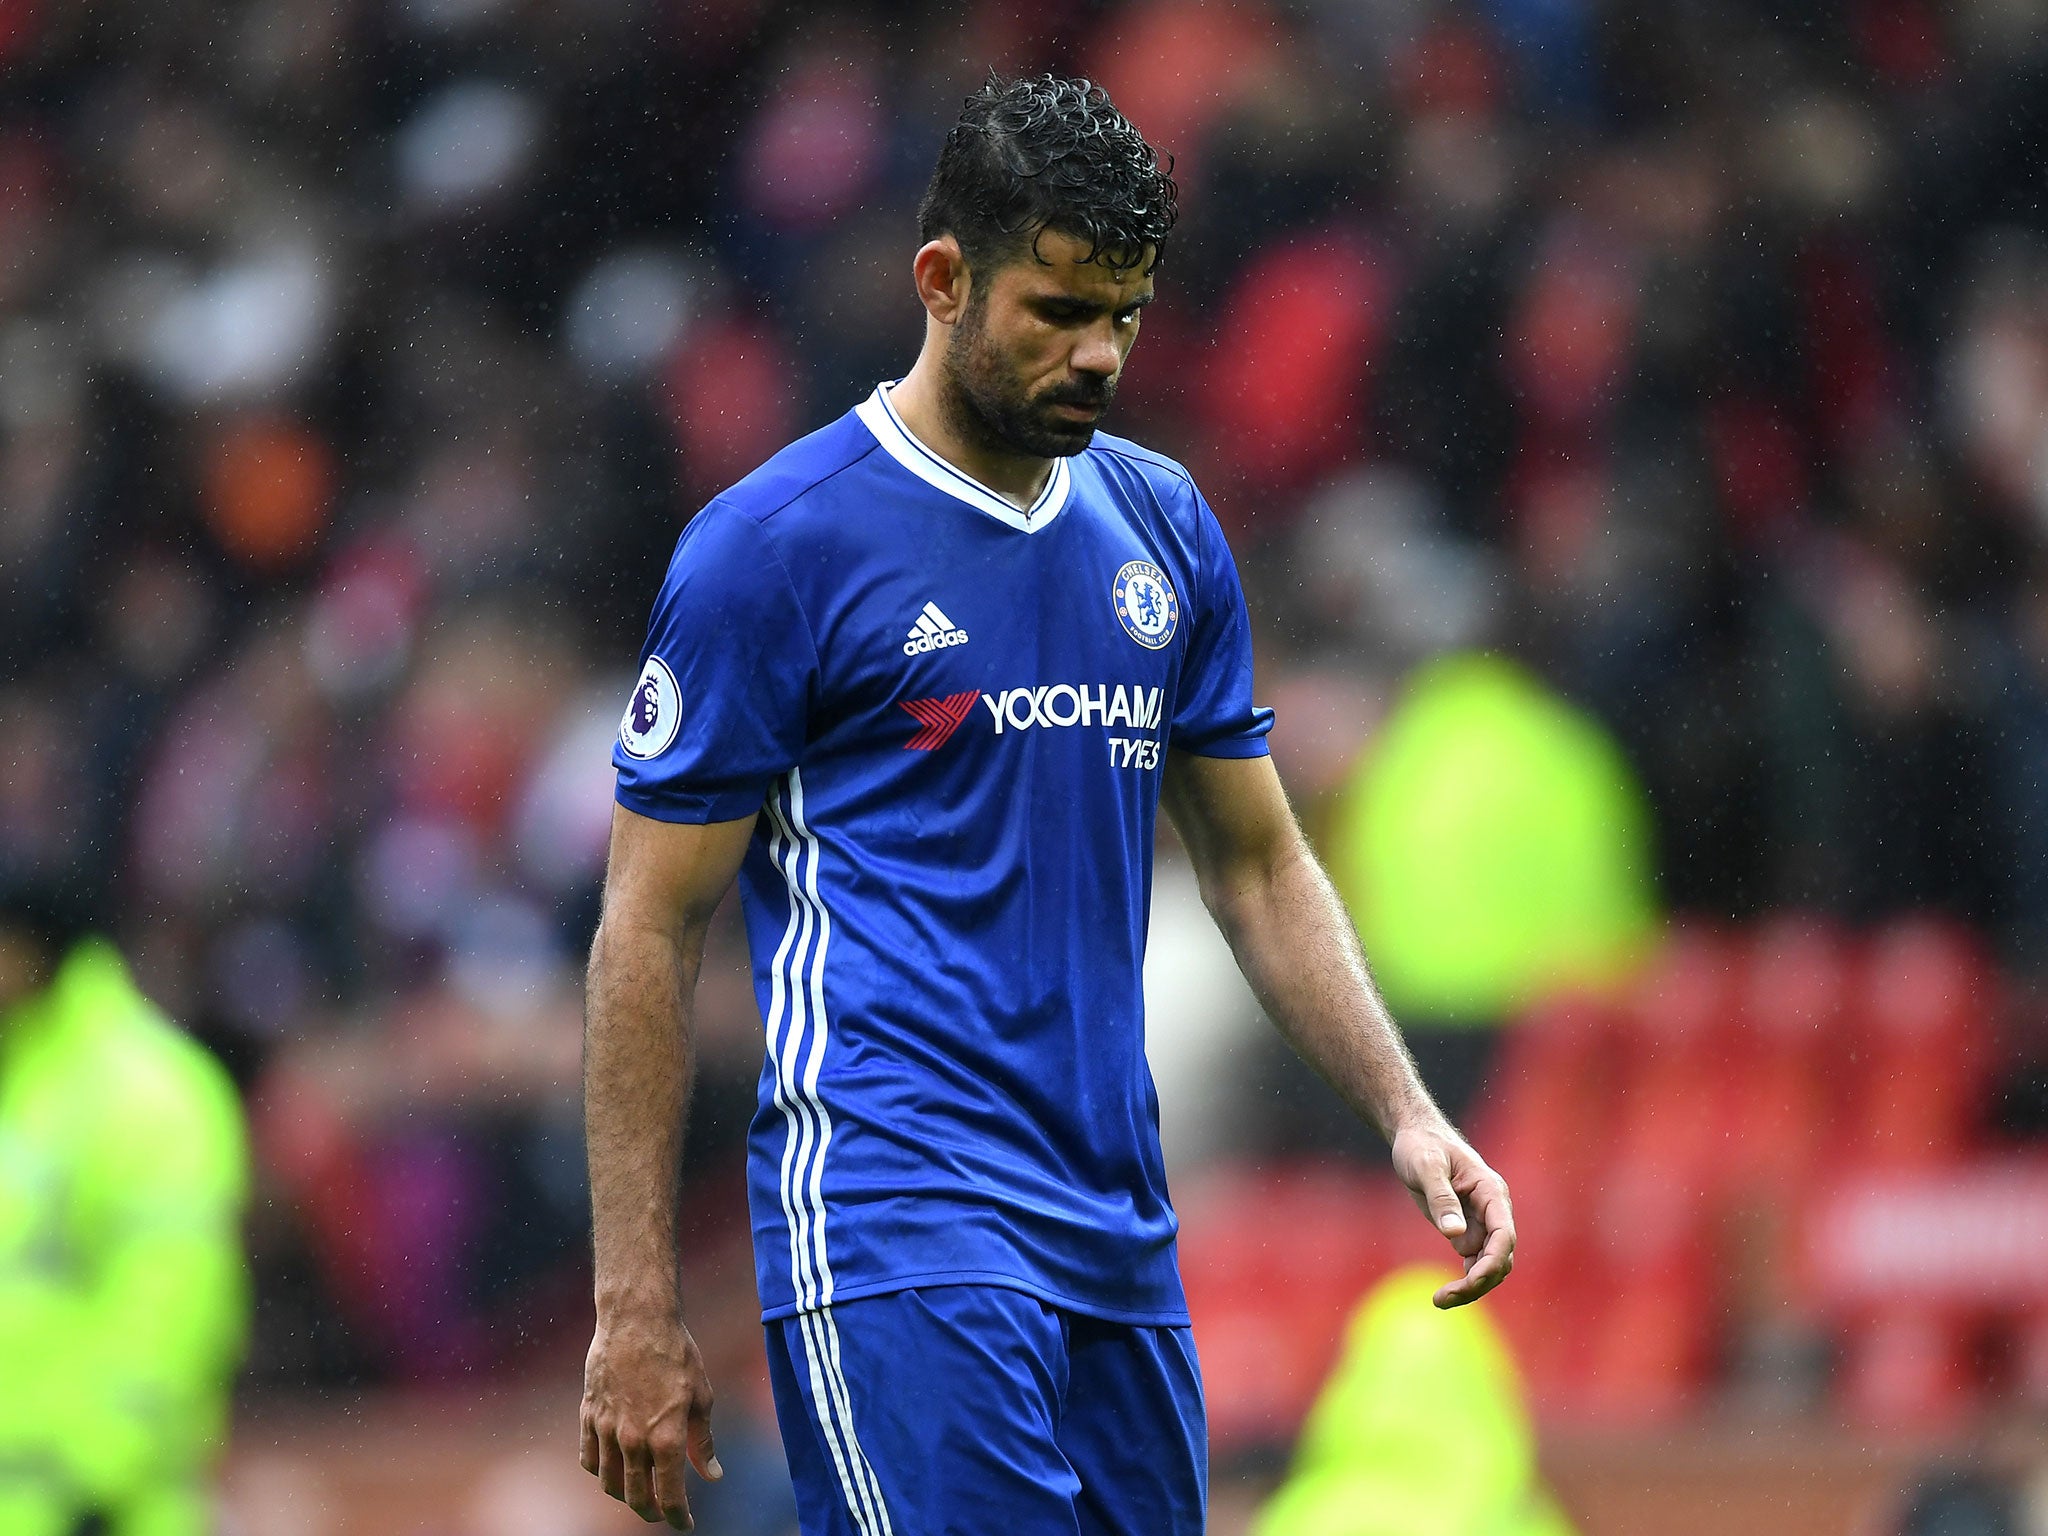 Costa has been repeatedly linked with a move away from Stamford Bridge